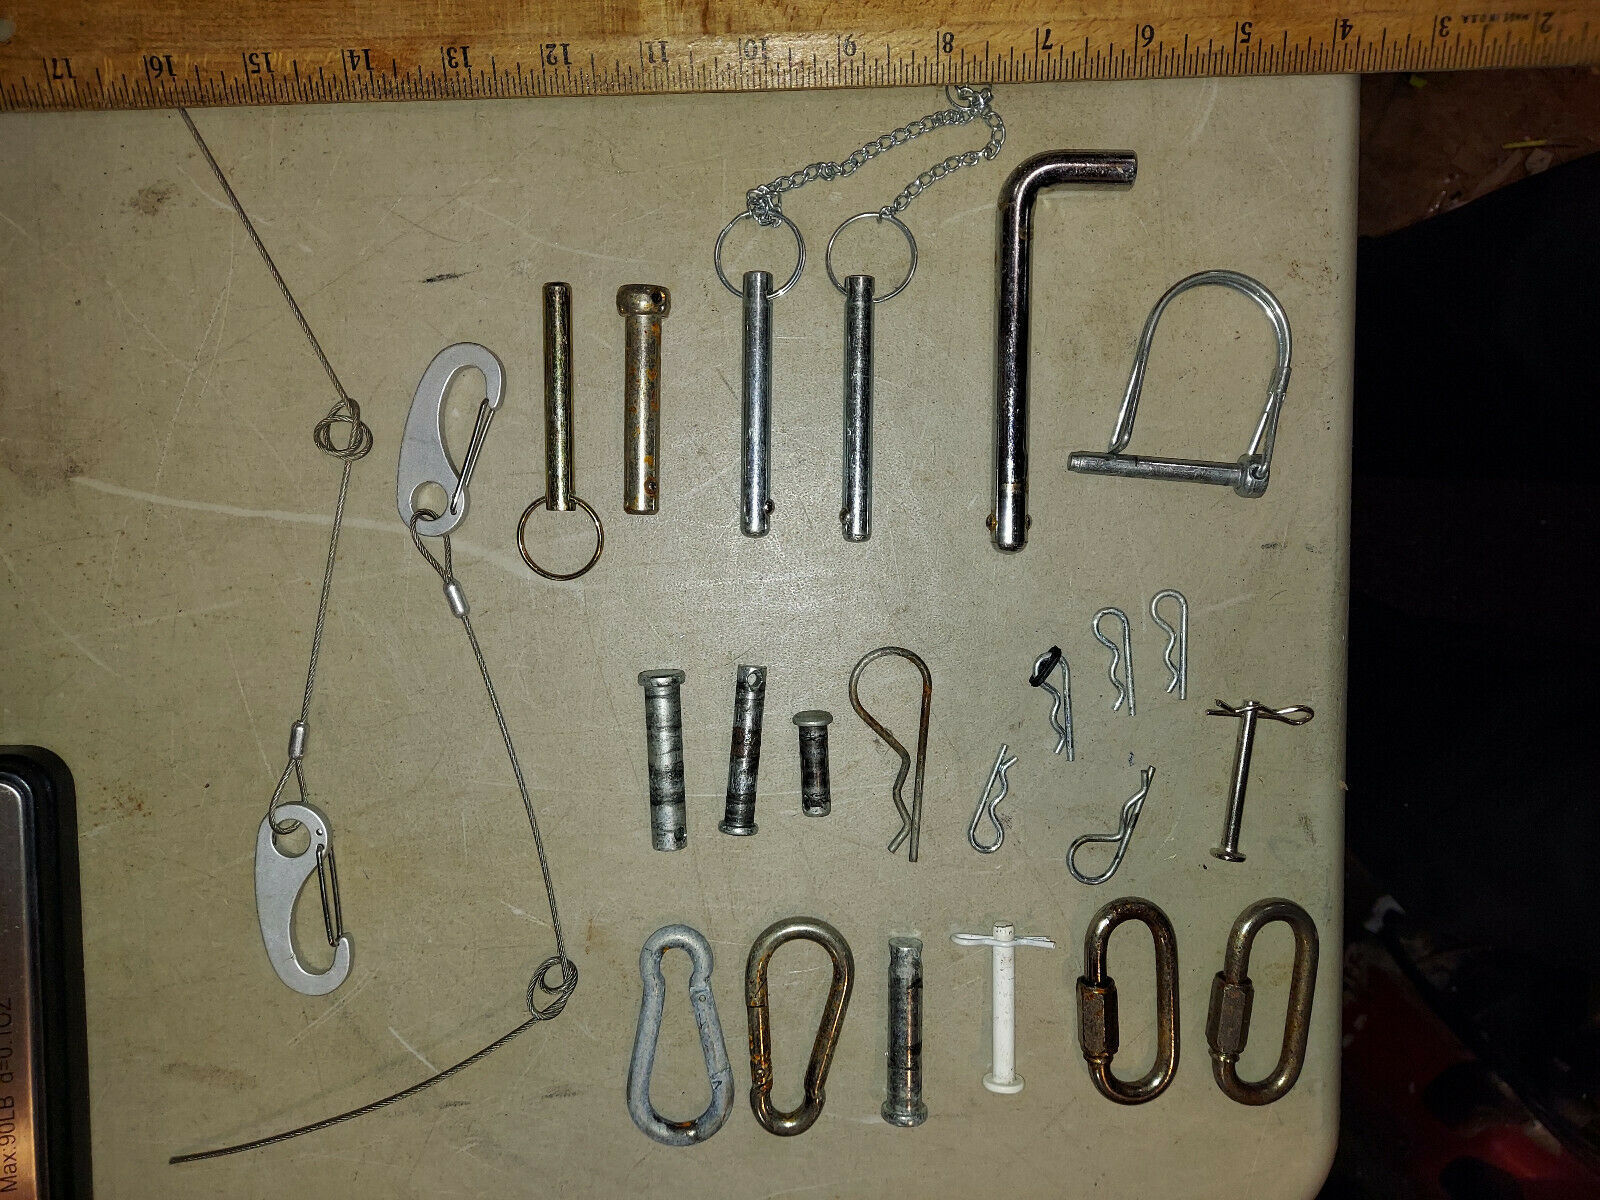 Primary image for 21YY07 ASSORTED PINS & CLIPS, 18 PCS: BALL DETENTS, CLEVIS, CARABINERS, ET AL